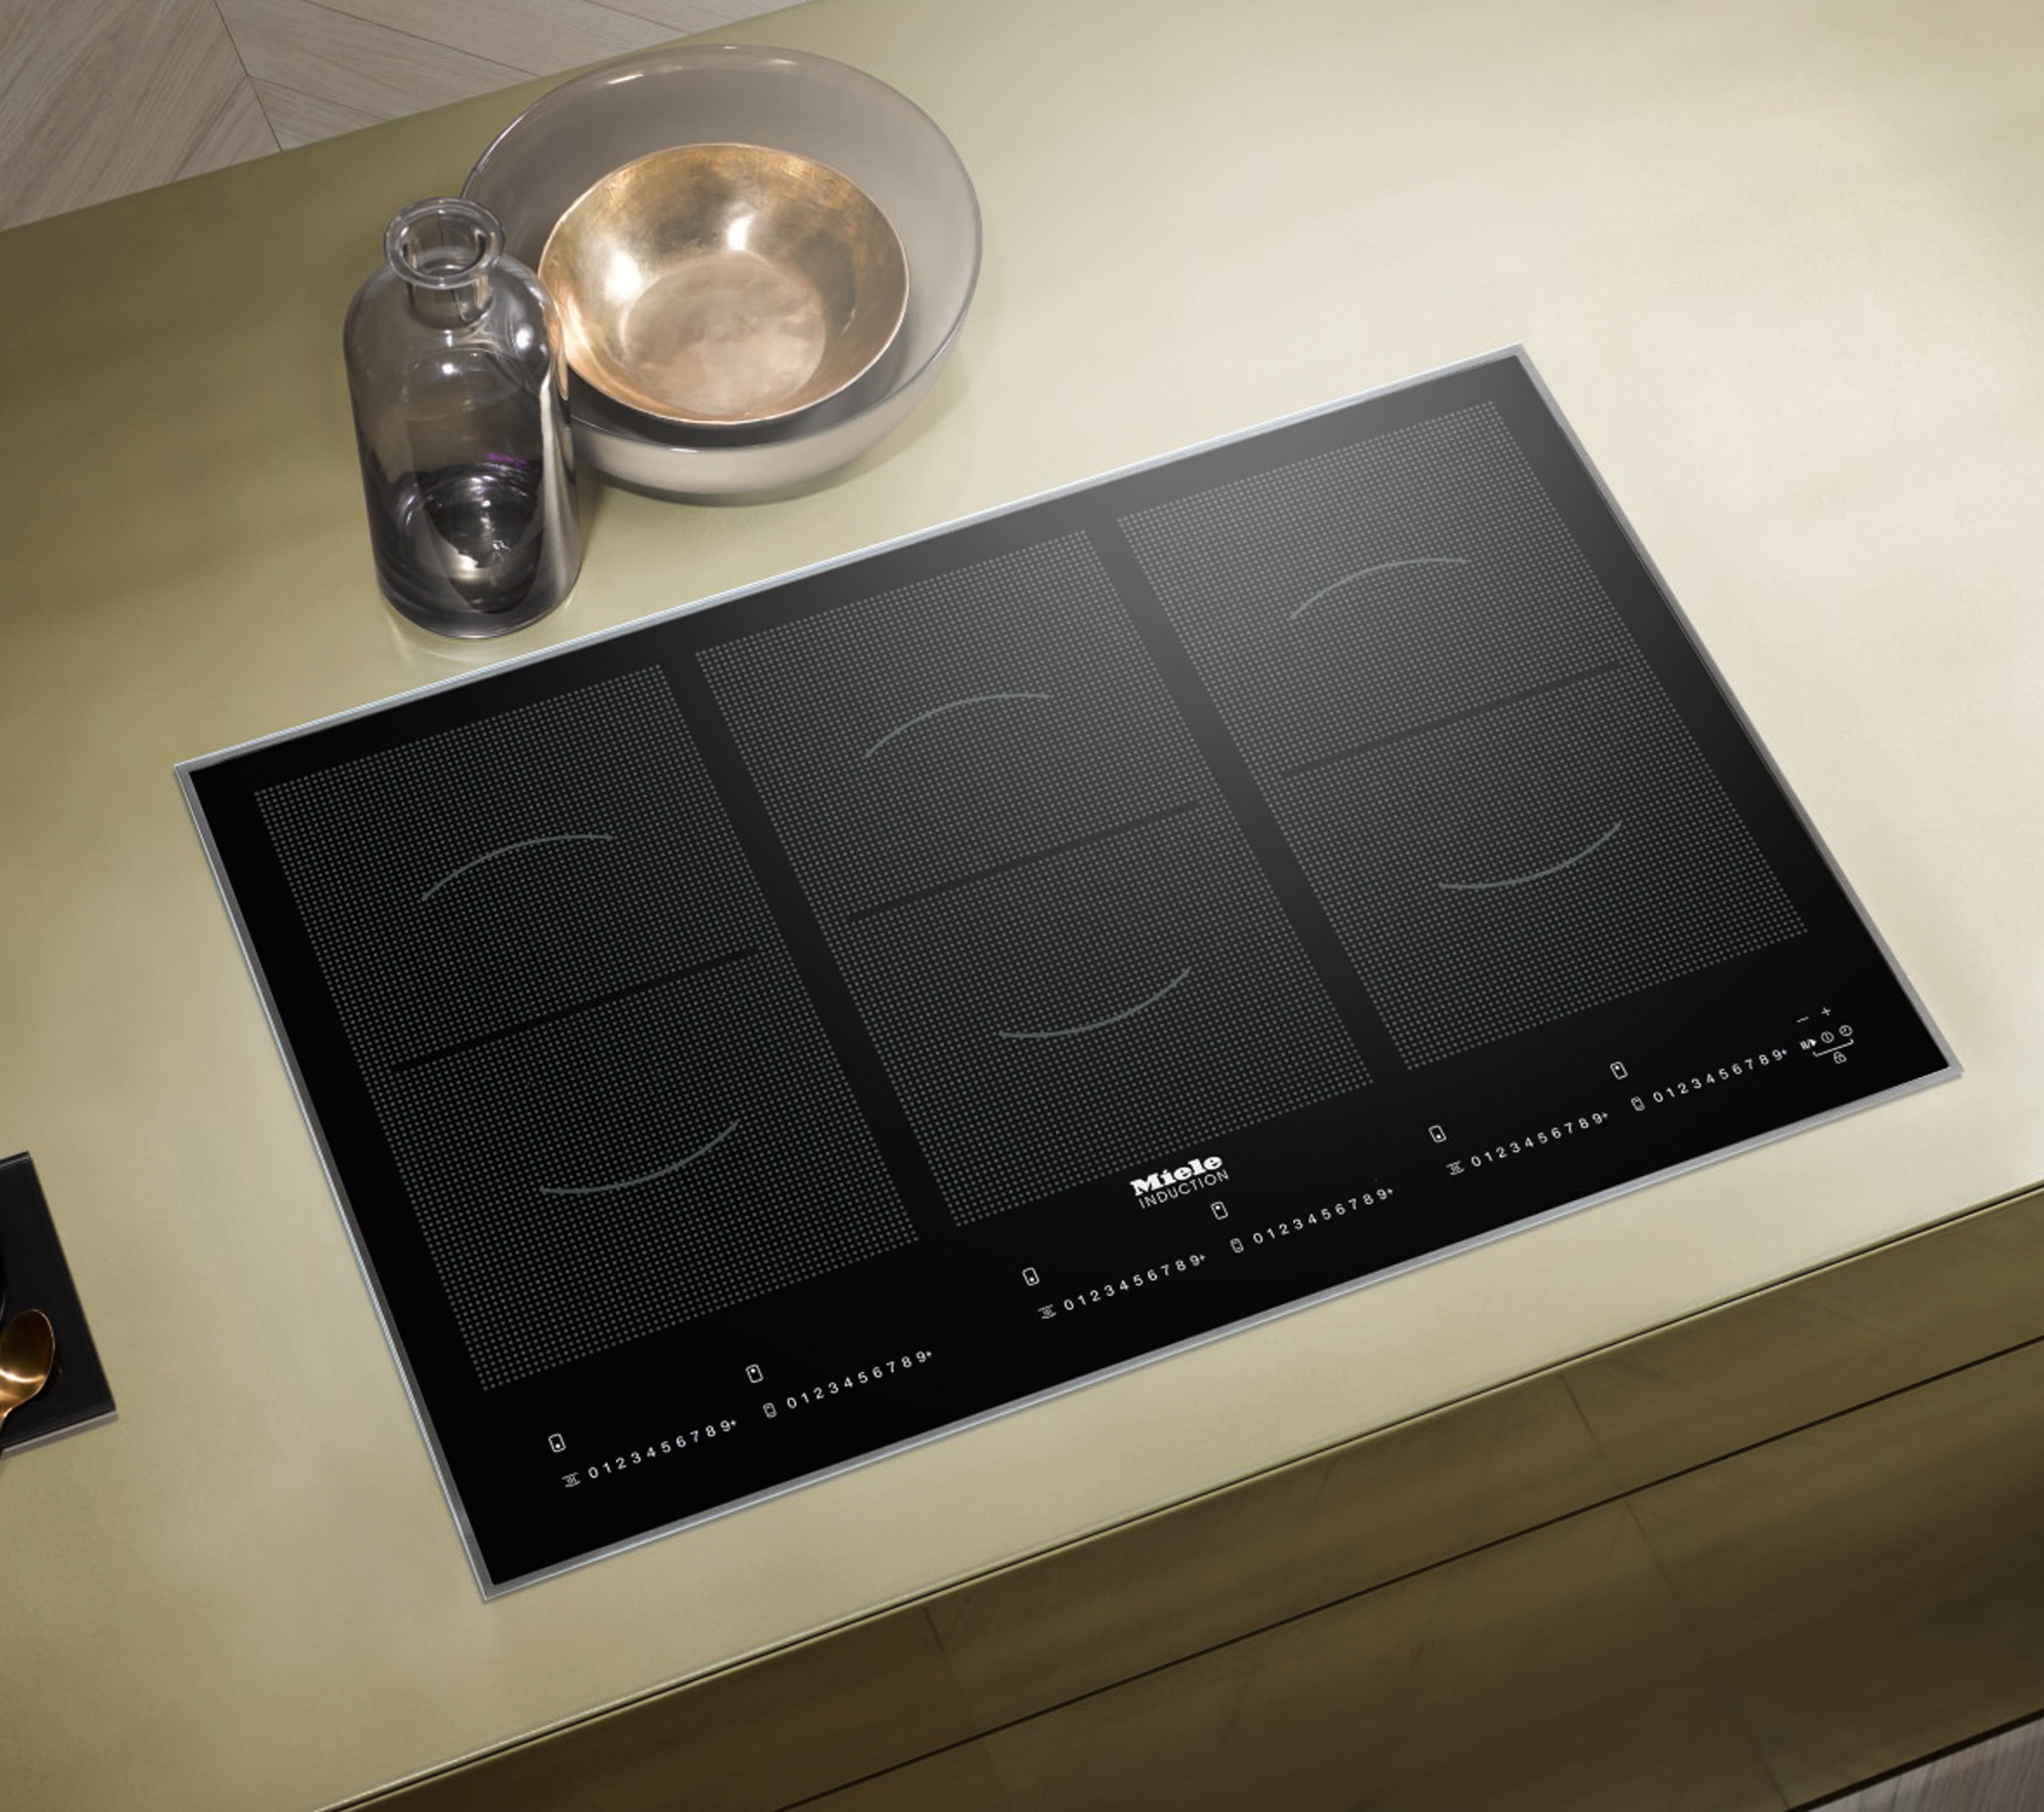 Miele Perfection Series KM 6366-1 Induction Hob